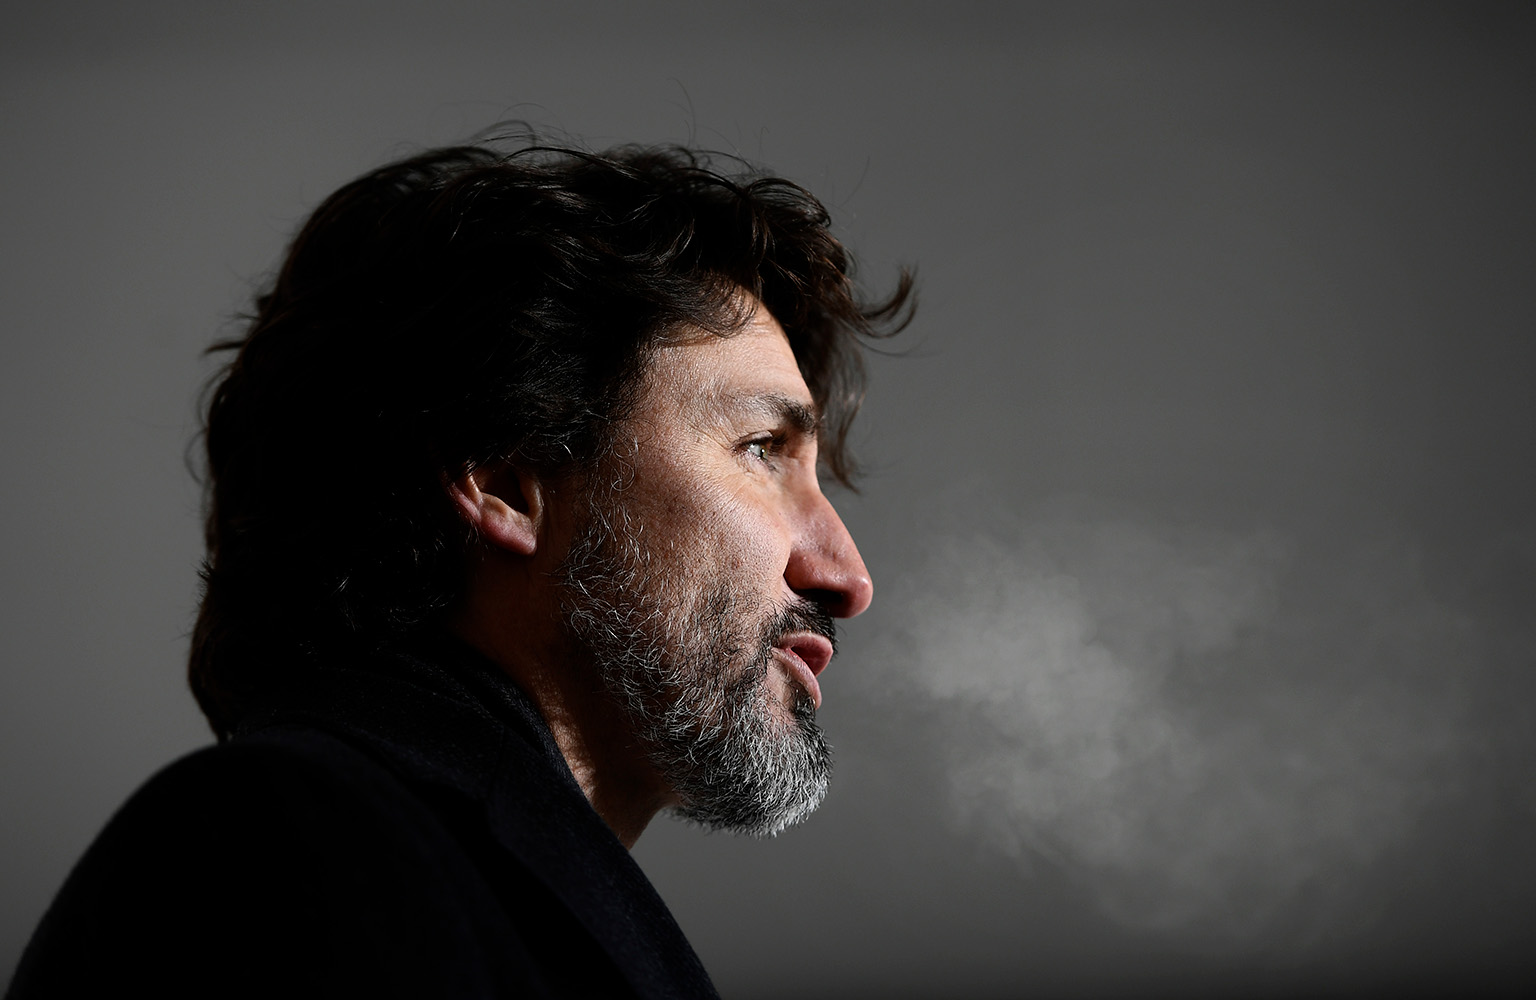 Justin Trudeau stands outside at night, his breath visible in the cold. He has longer hair and a beard.